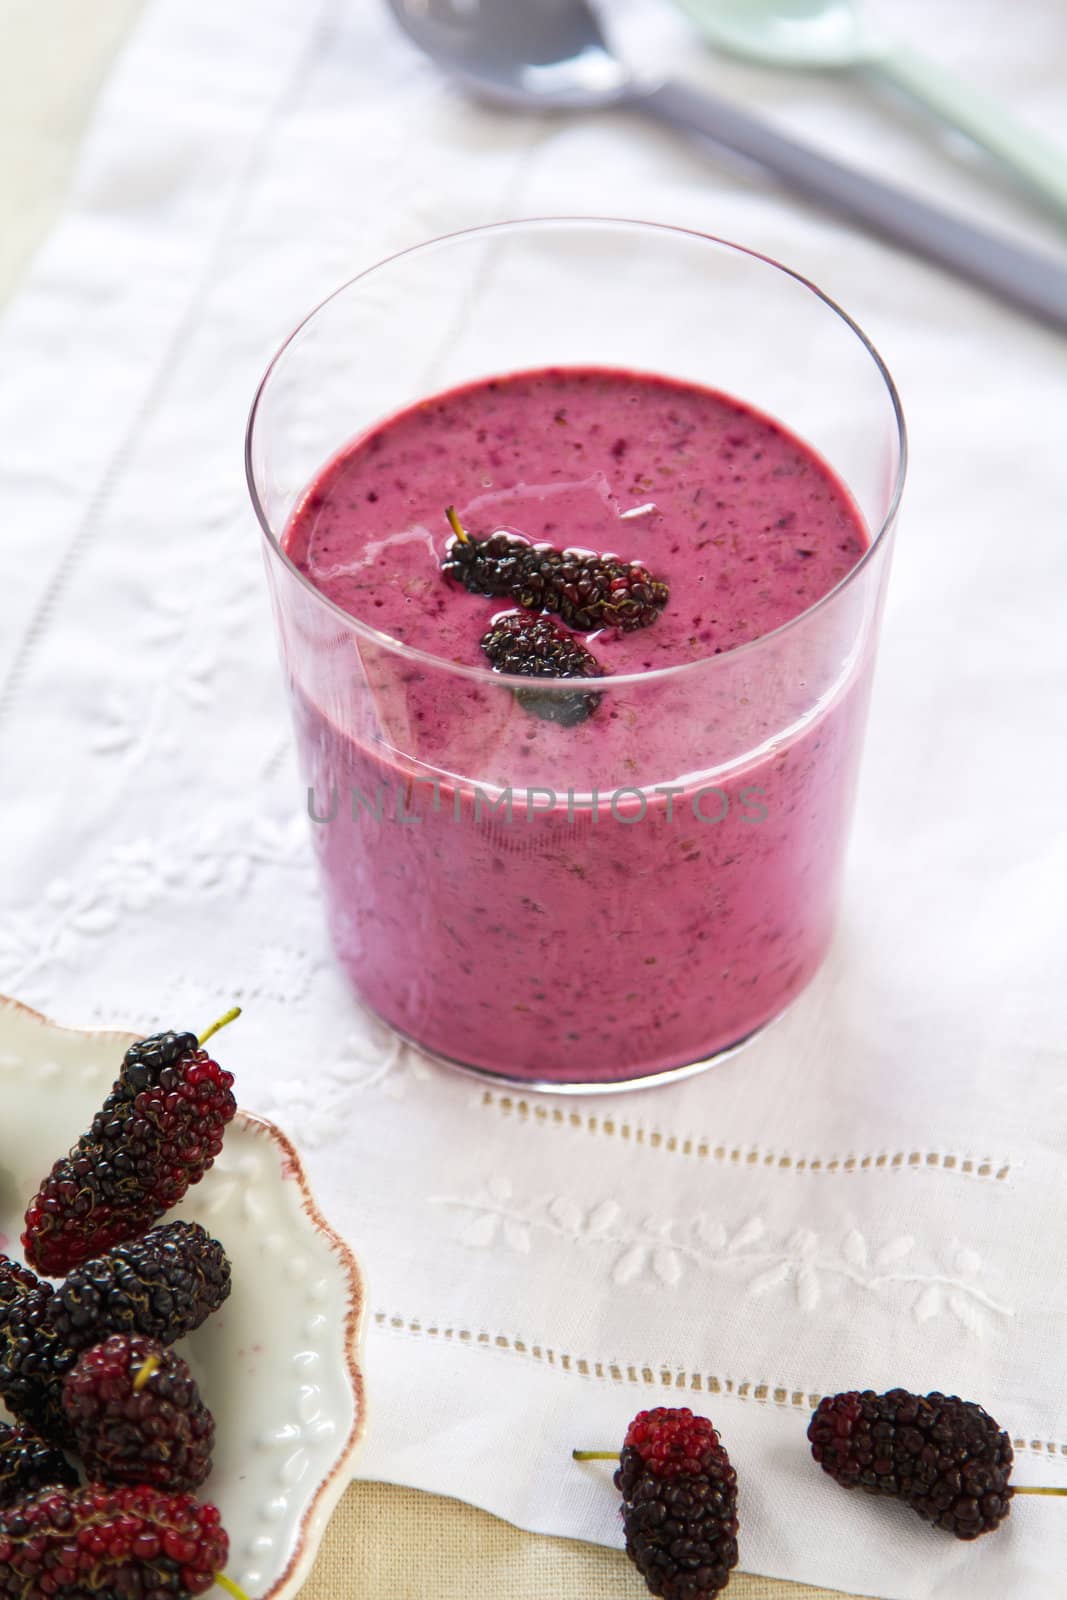 Mulberry smoothie by vanillaechoes